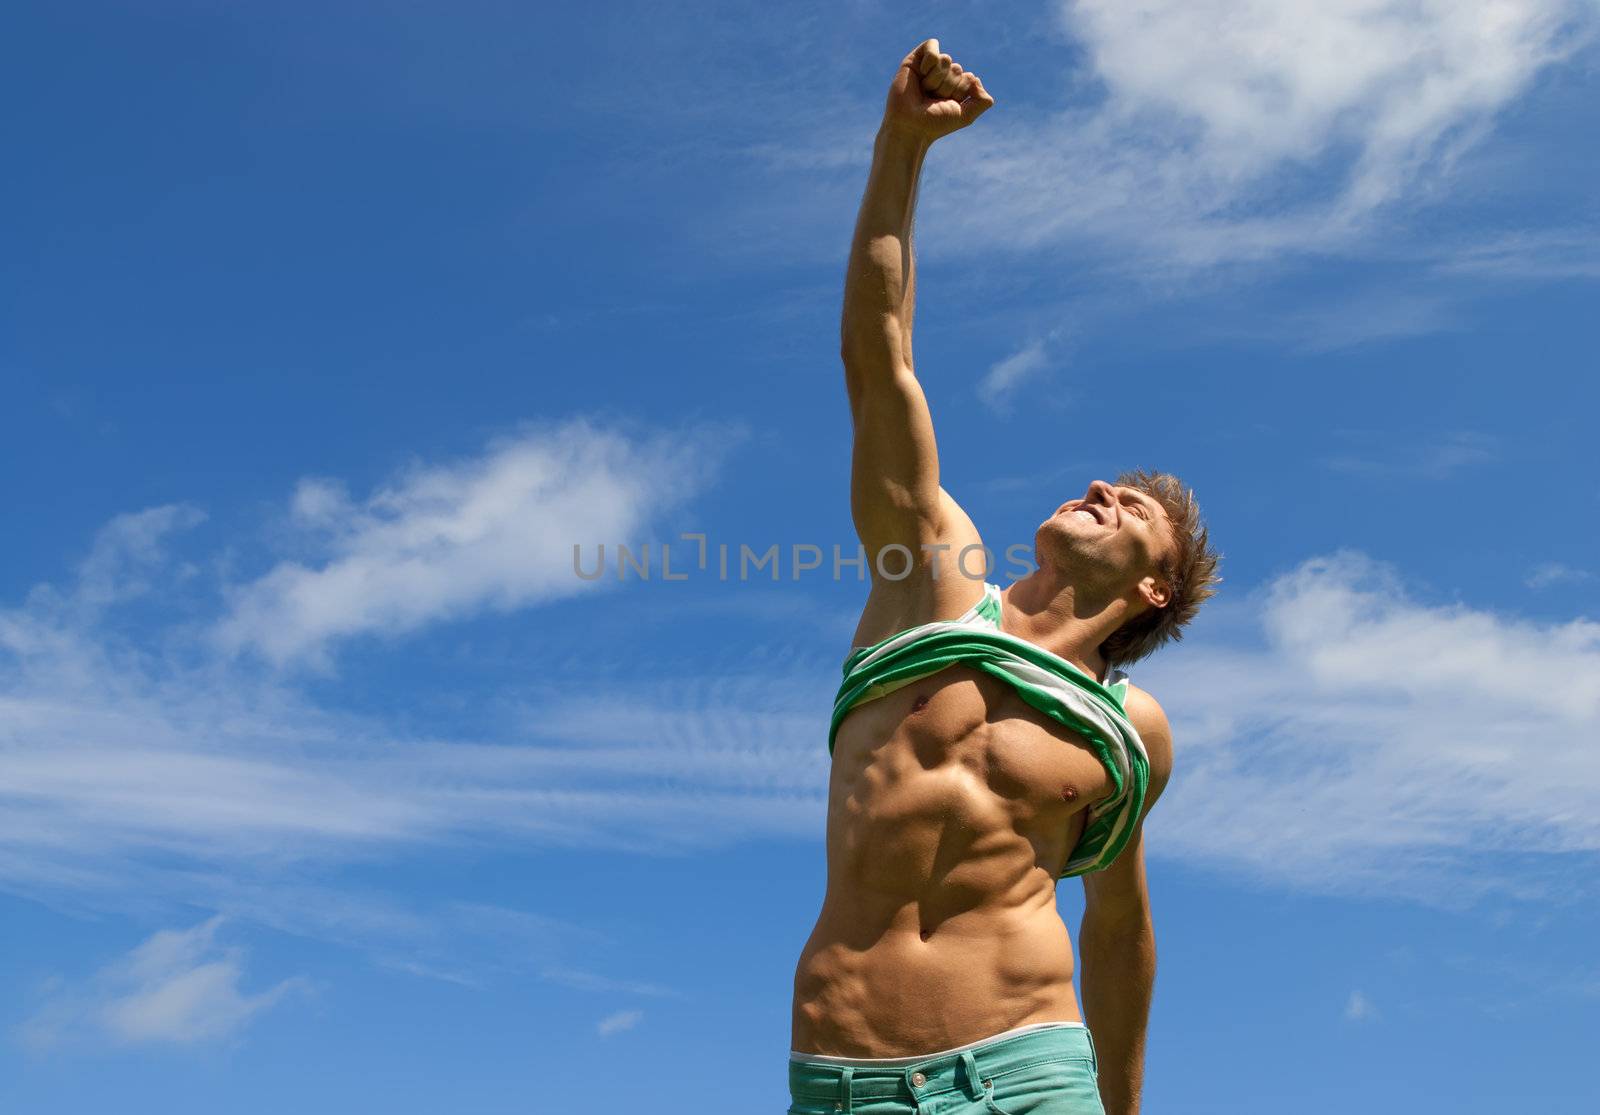 Happy fit man with his arm raised in joy, on blue sky background.